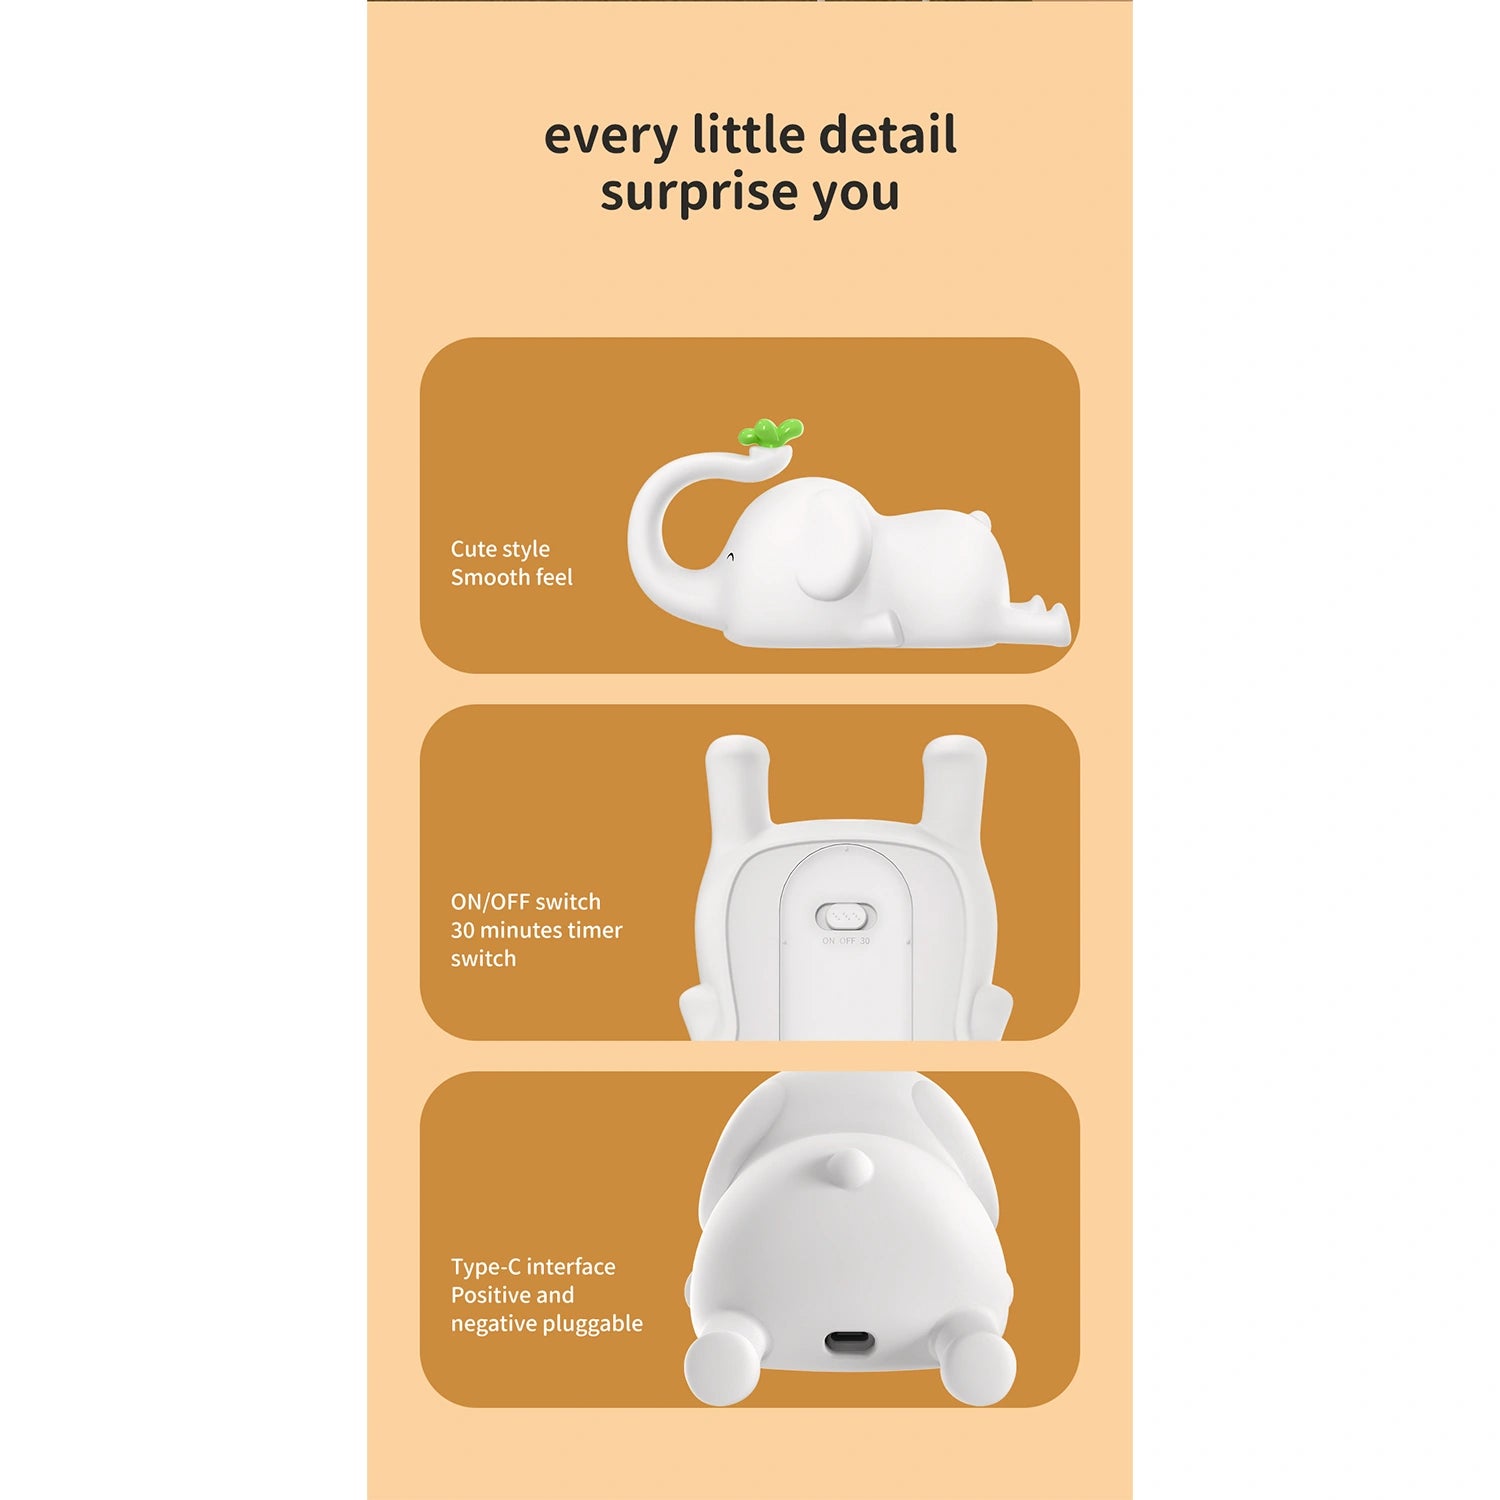 IDMIX Cute Small Flying Elephant Nightlight, LED Squishy Duck Lamp, Silicone Dimmable Nursery Patting Light, Rechargeable Bedside Touch Lamp Indoor Office Home